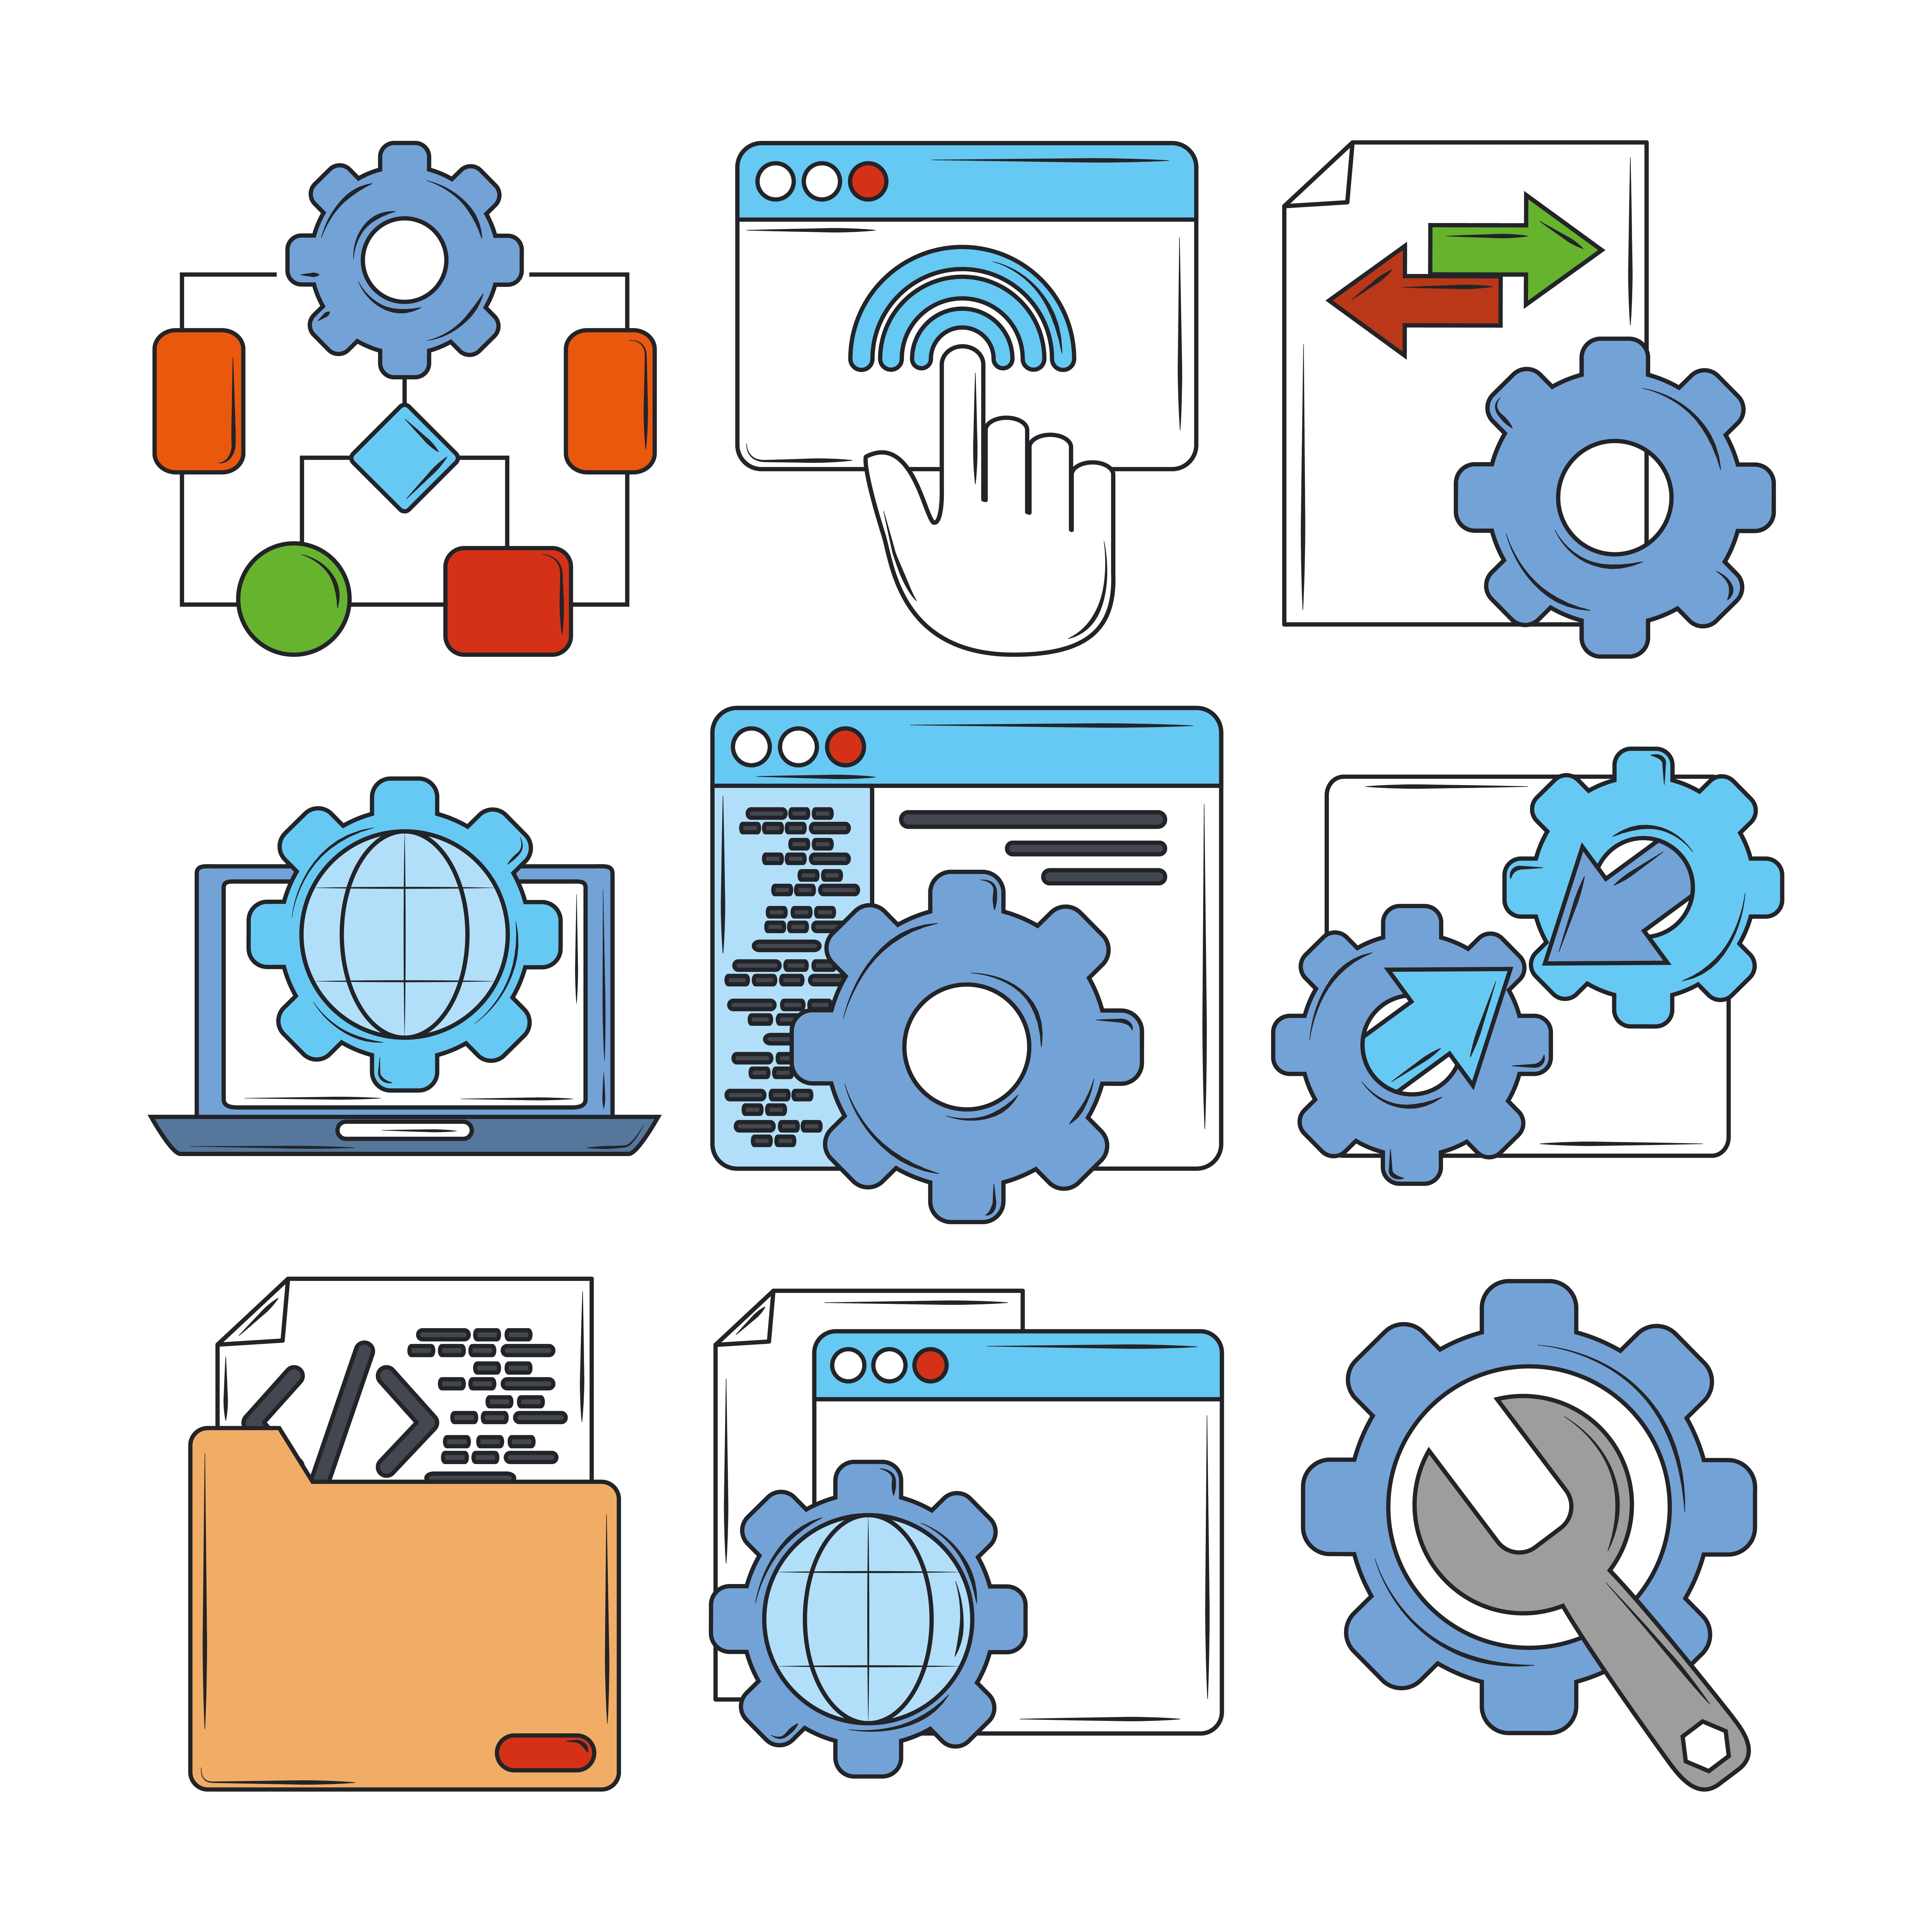 An icon set featuring gears and a computer for getting started with local SEO.